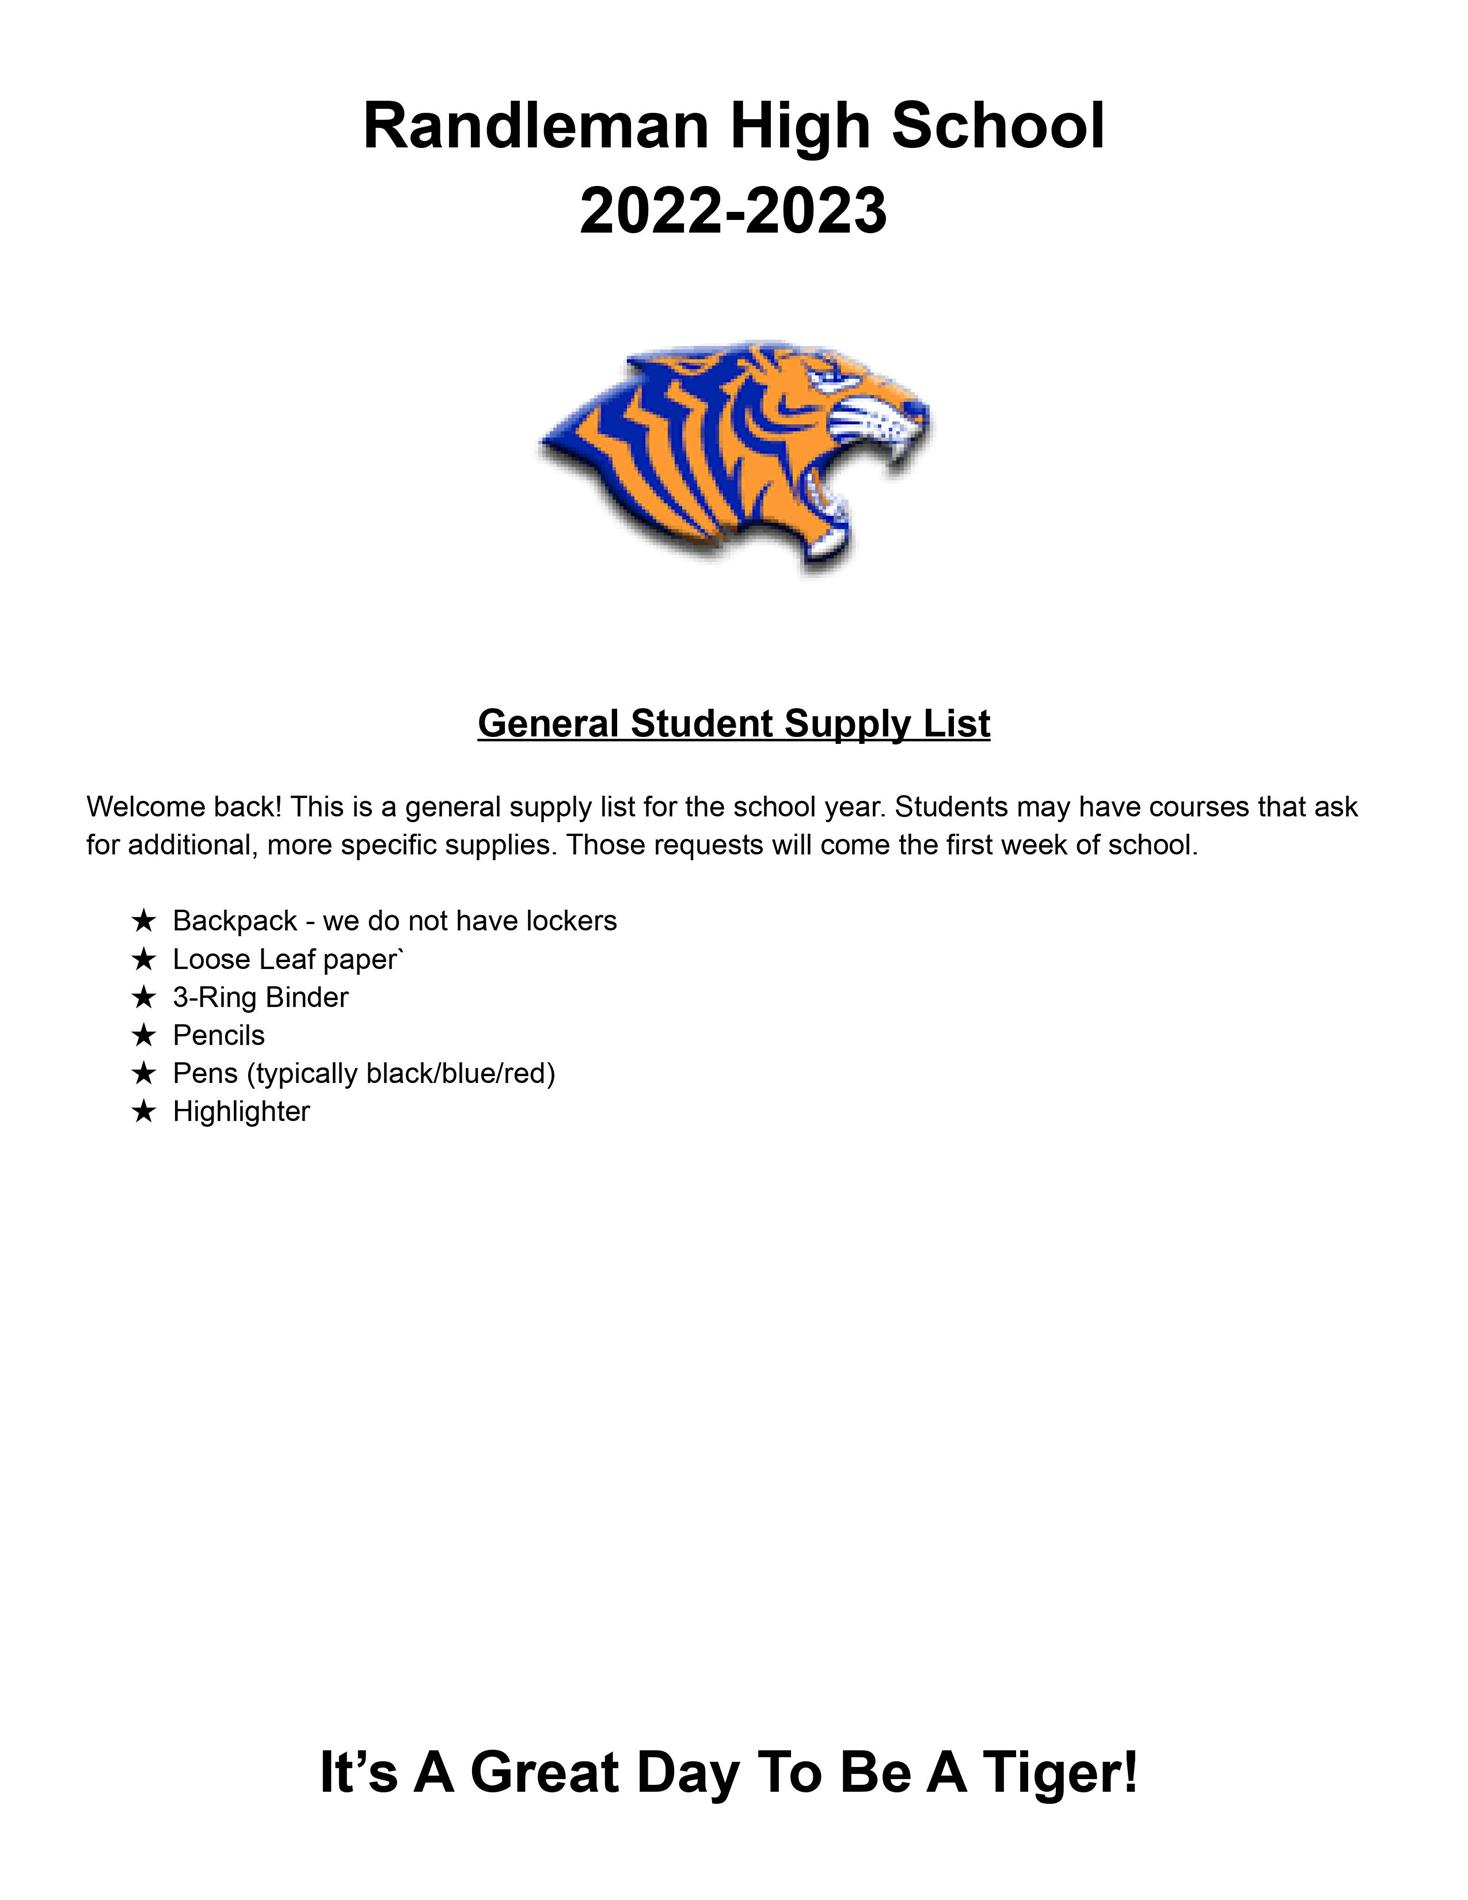 General Student Supply List